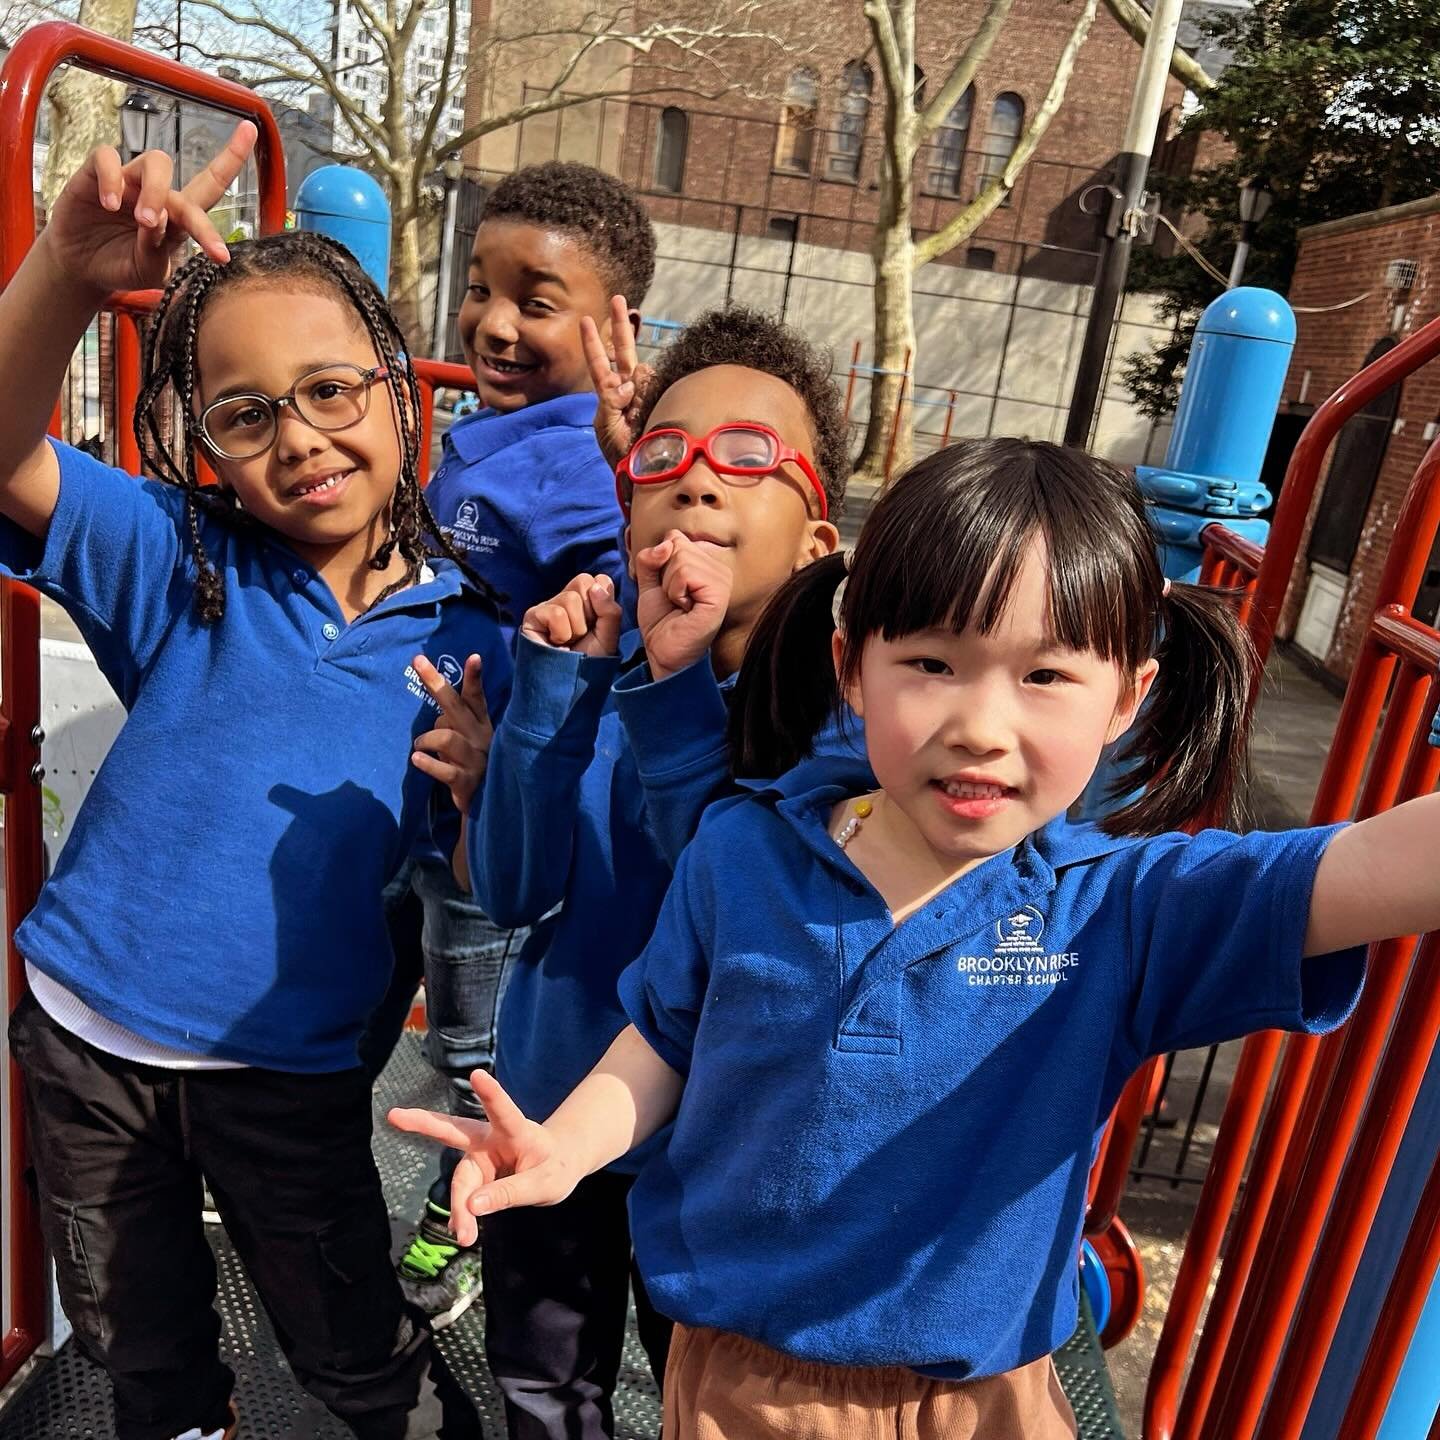 This #MondayMotivation goes out to the beautiful spring weather today! 🌞
.
Our kiddos love to walk to the local playground on a nice day to play with their classmates! 😎
.
#brooklynRISE #bkRISE #withconfidence #withvoice #withpurpose #togetherweRIS